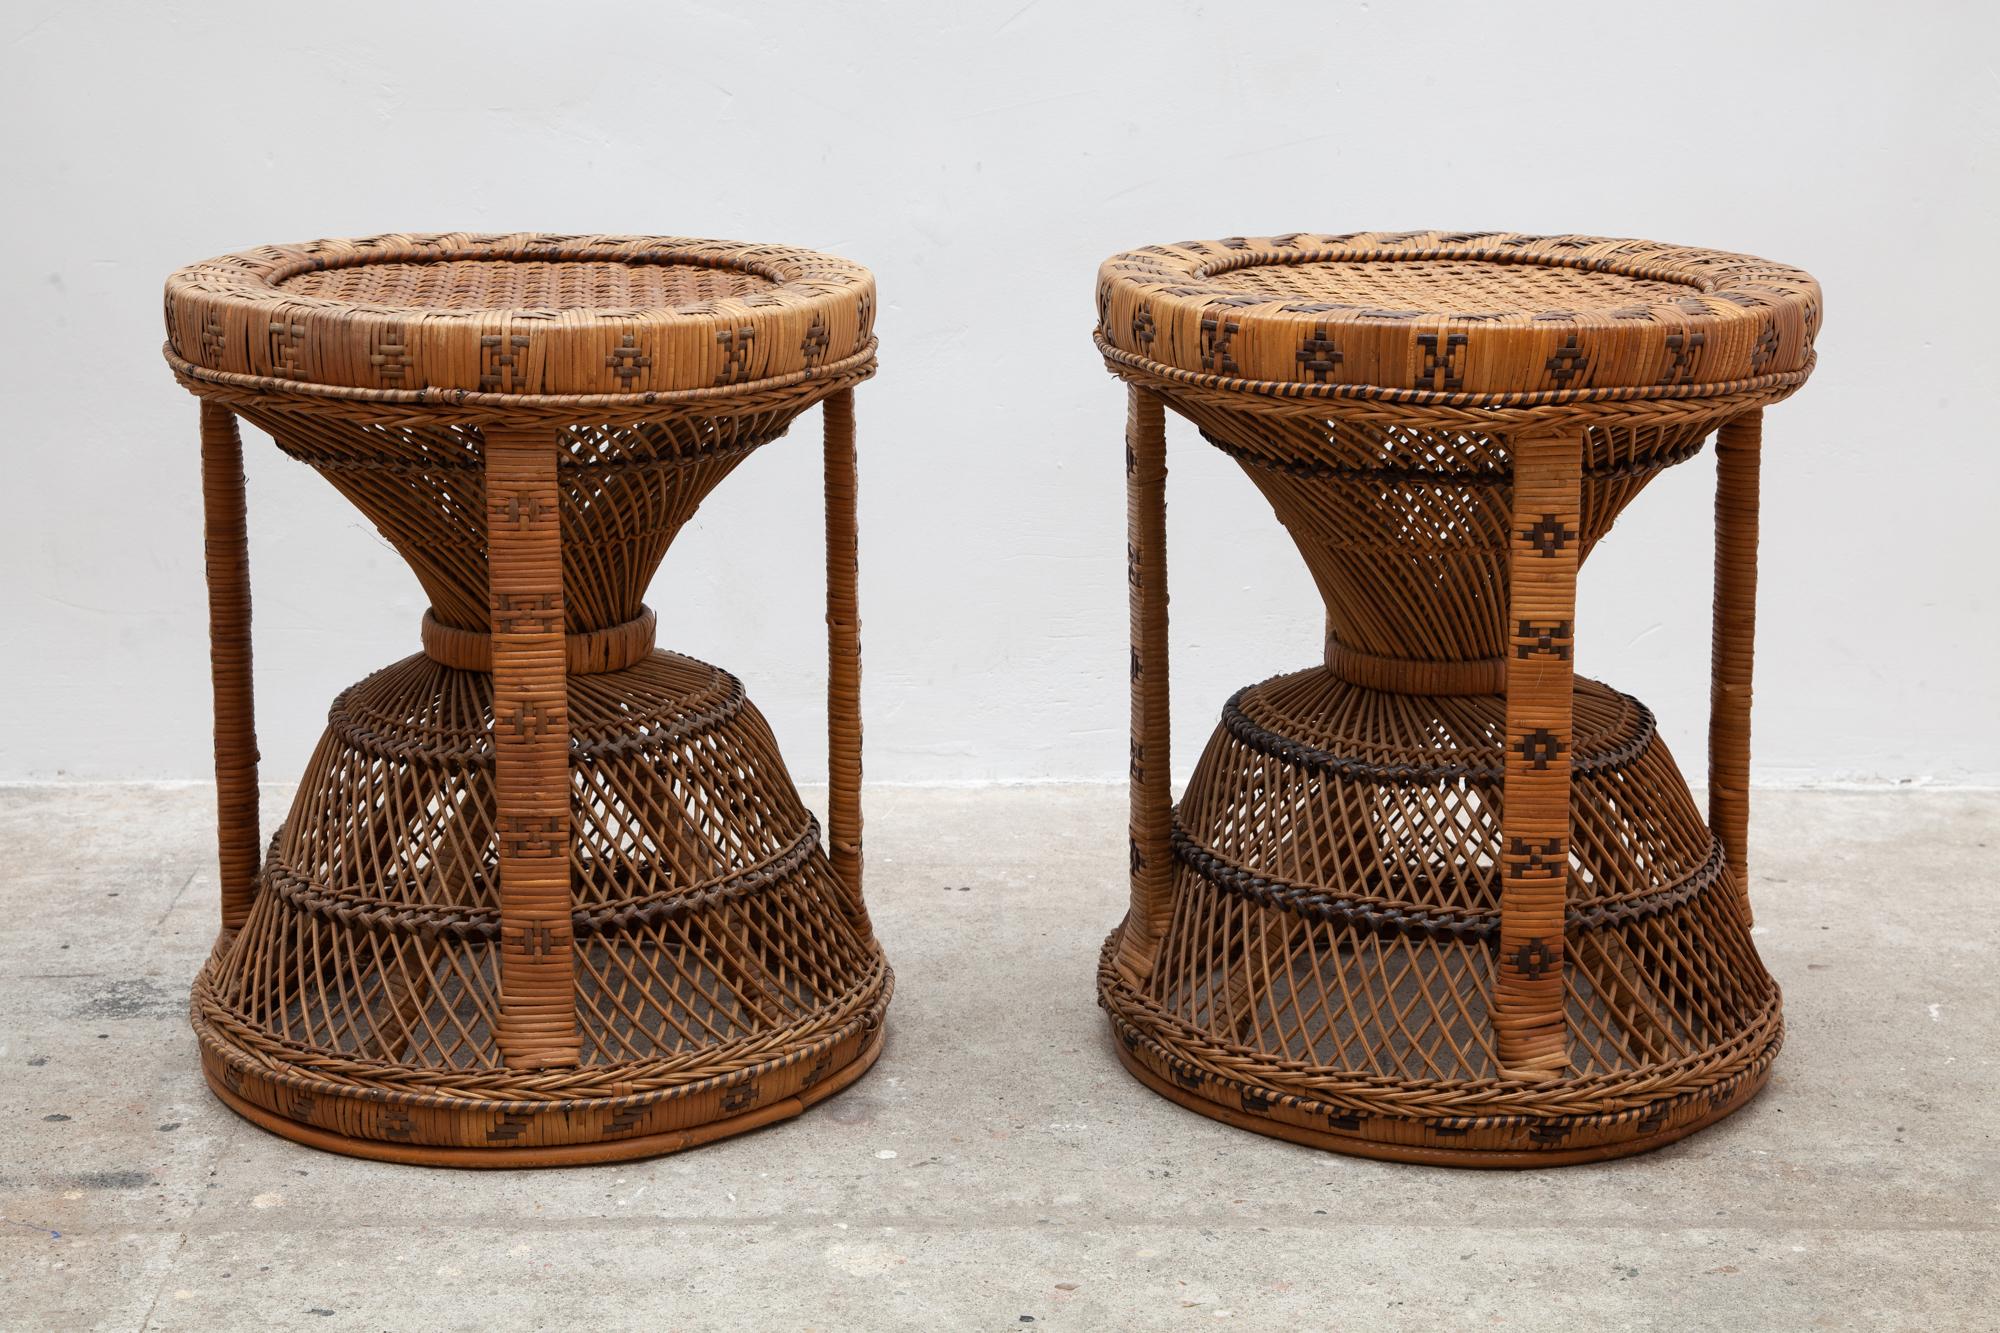 The set of two wicker bamboo stools are extremely rare and are perfectly matching with the Emanuelle chair. The Emanuelle chair became iconic since it was an eye-catcher in the famous ‘Emanuelle’ film. The stools are rare to find and both pieces are